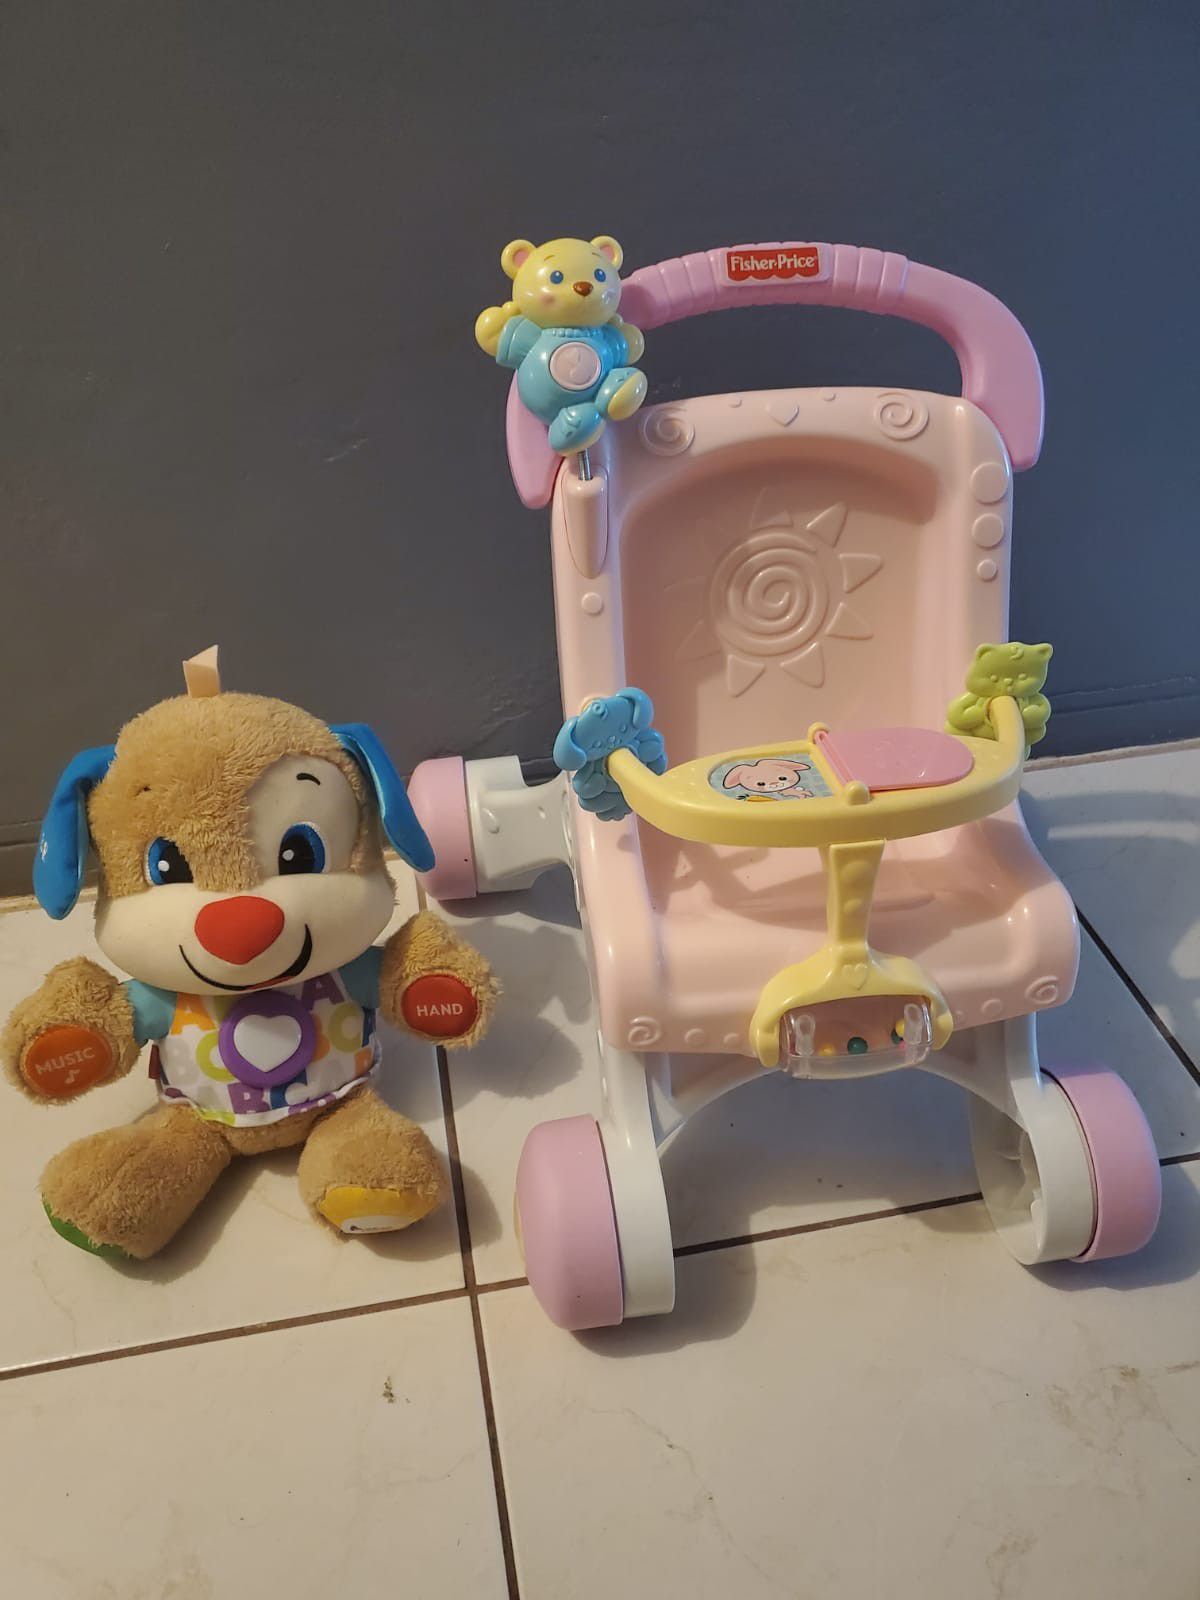 BABY DOLL WALKER AND A FISHER PRICE EDUCATIONAL DOLL